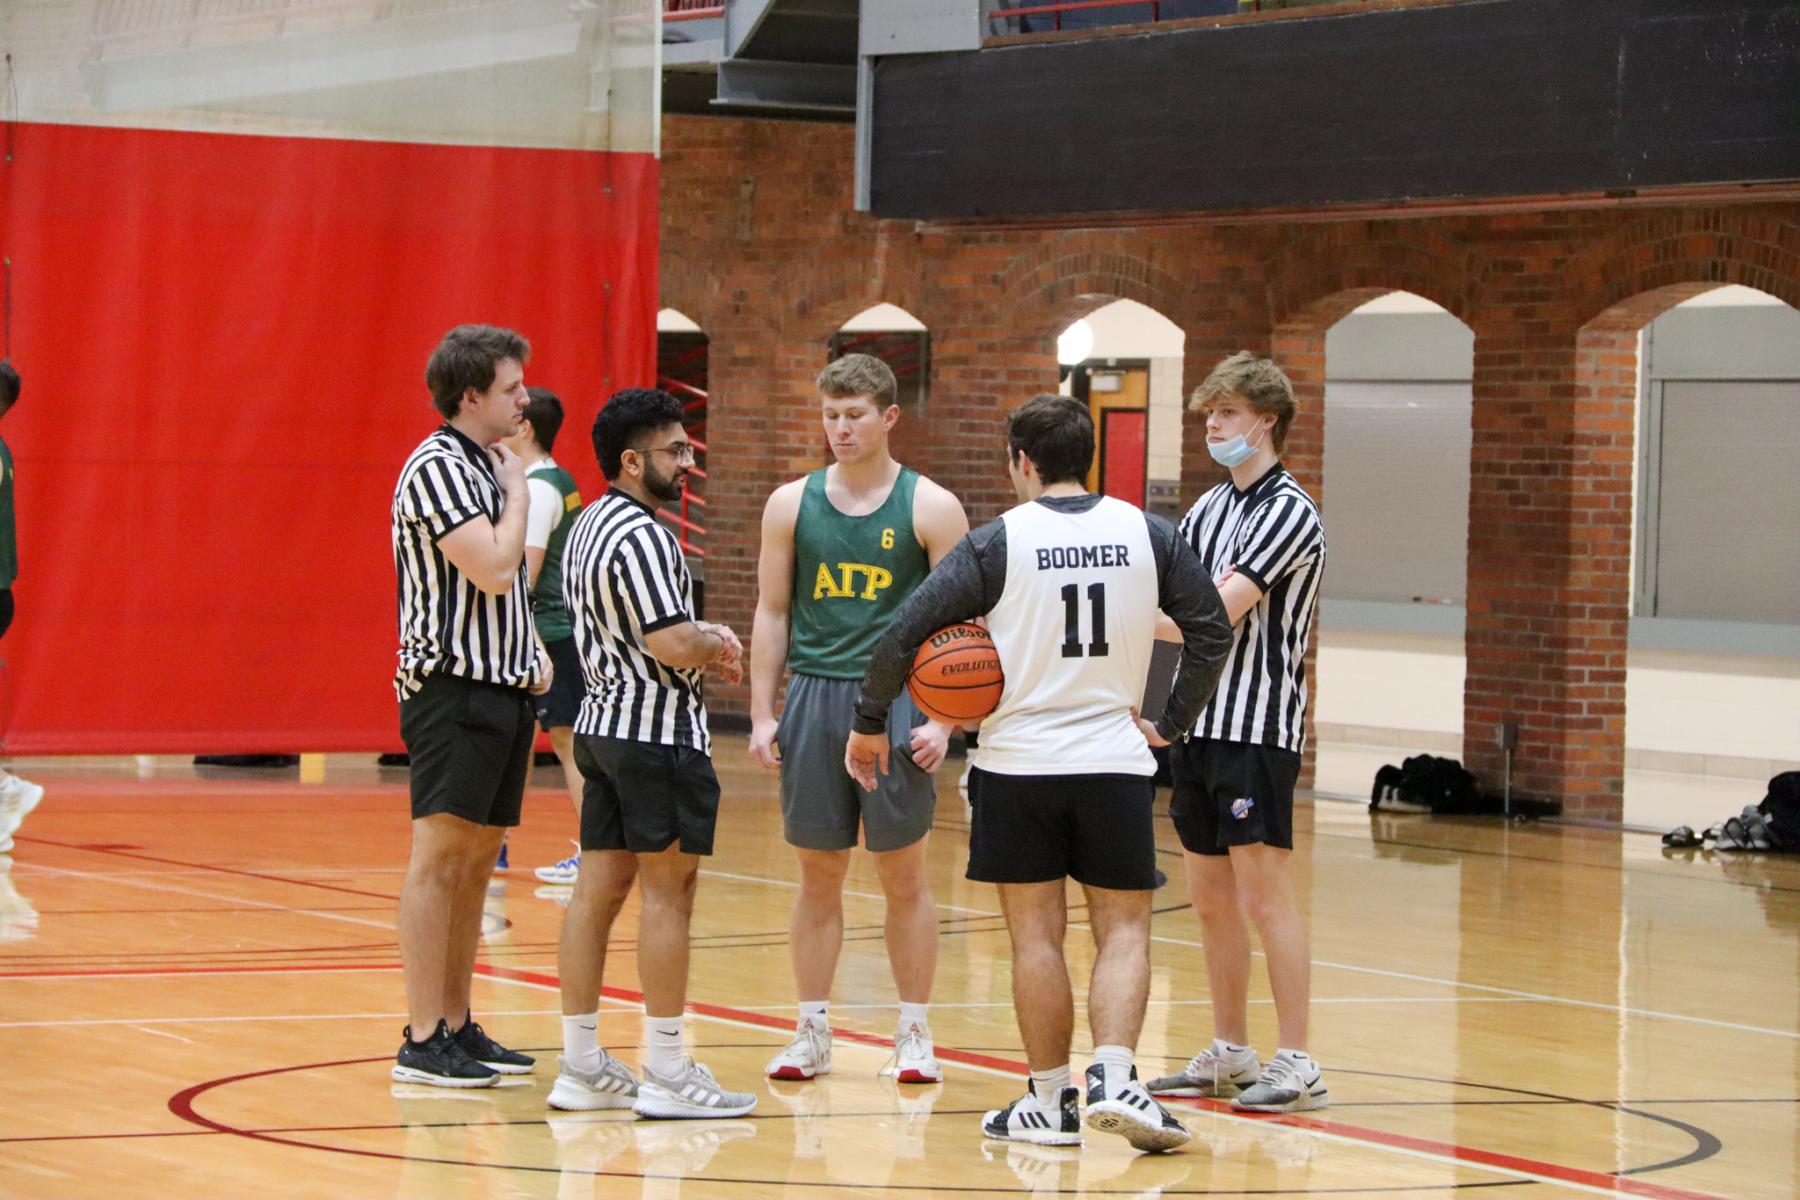 Basketball officials lead a captains meeting before an Intramural basketball game